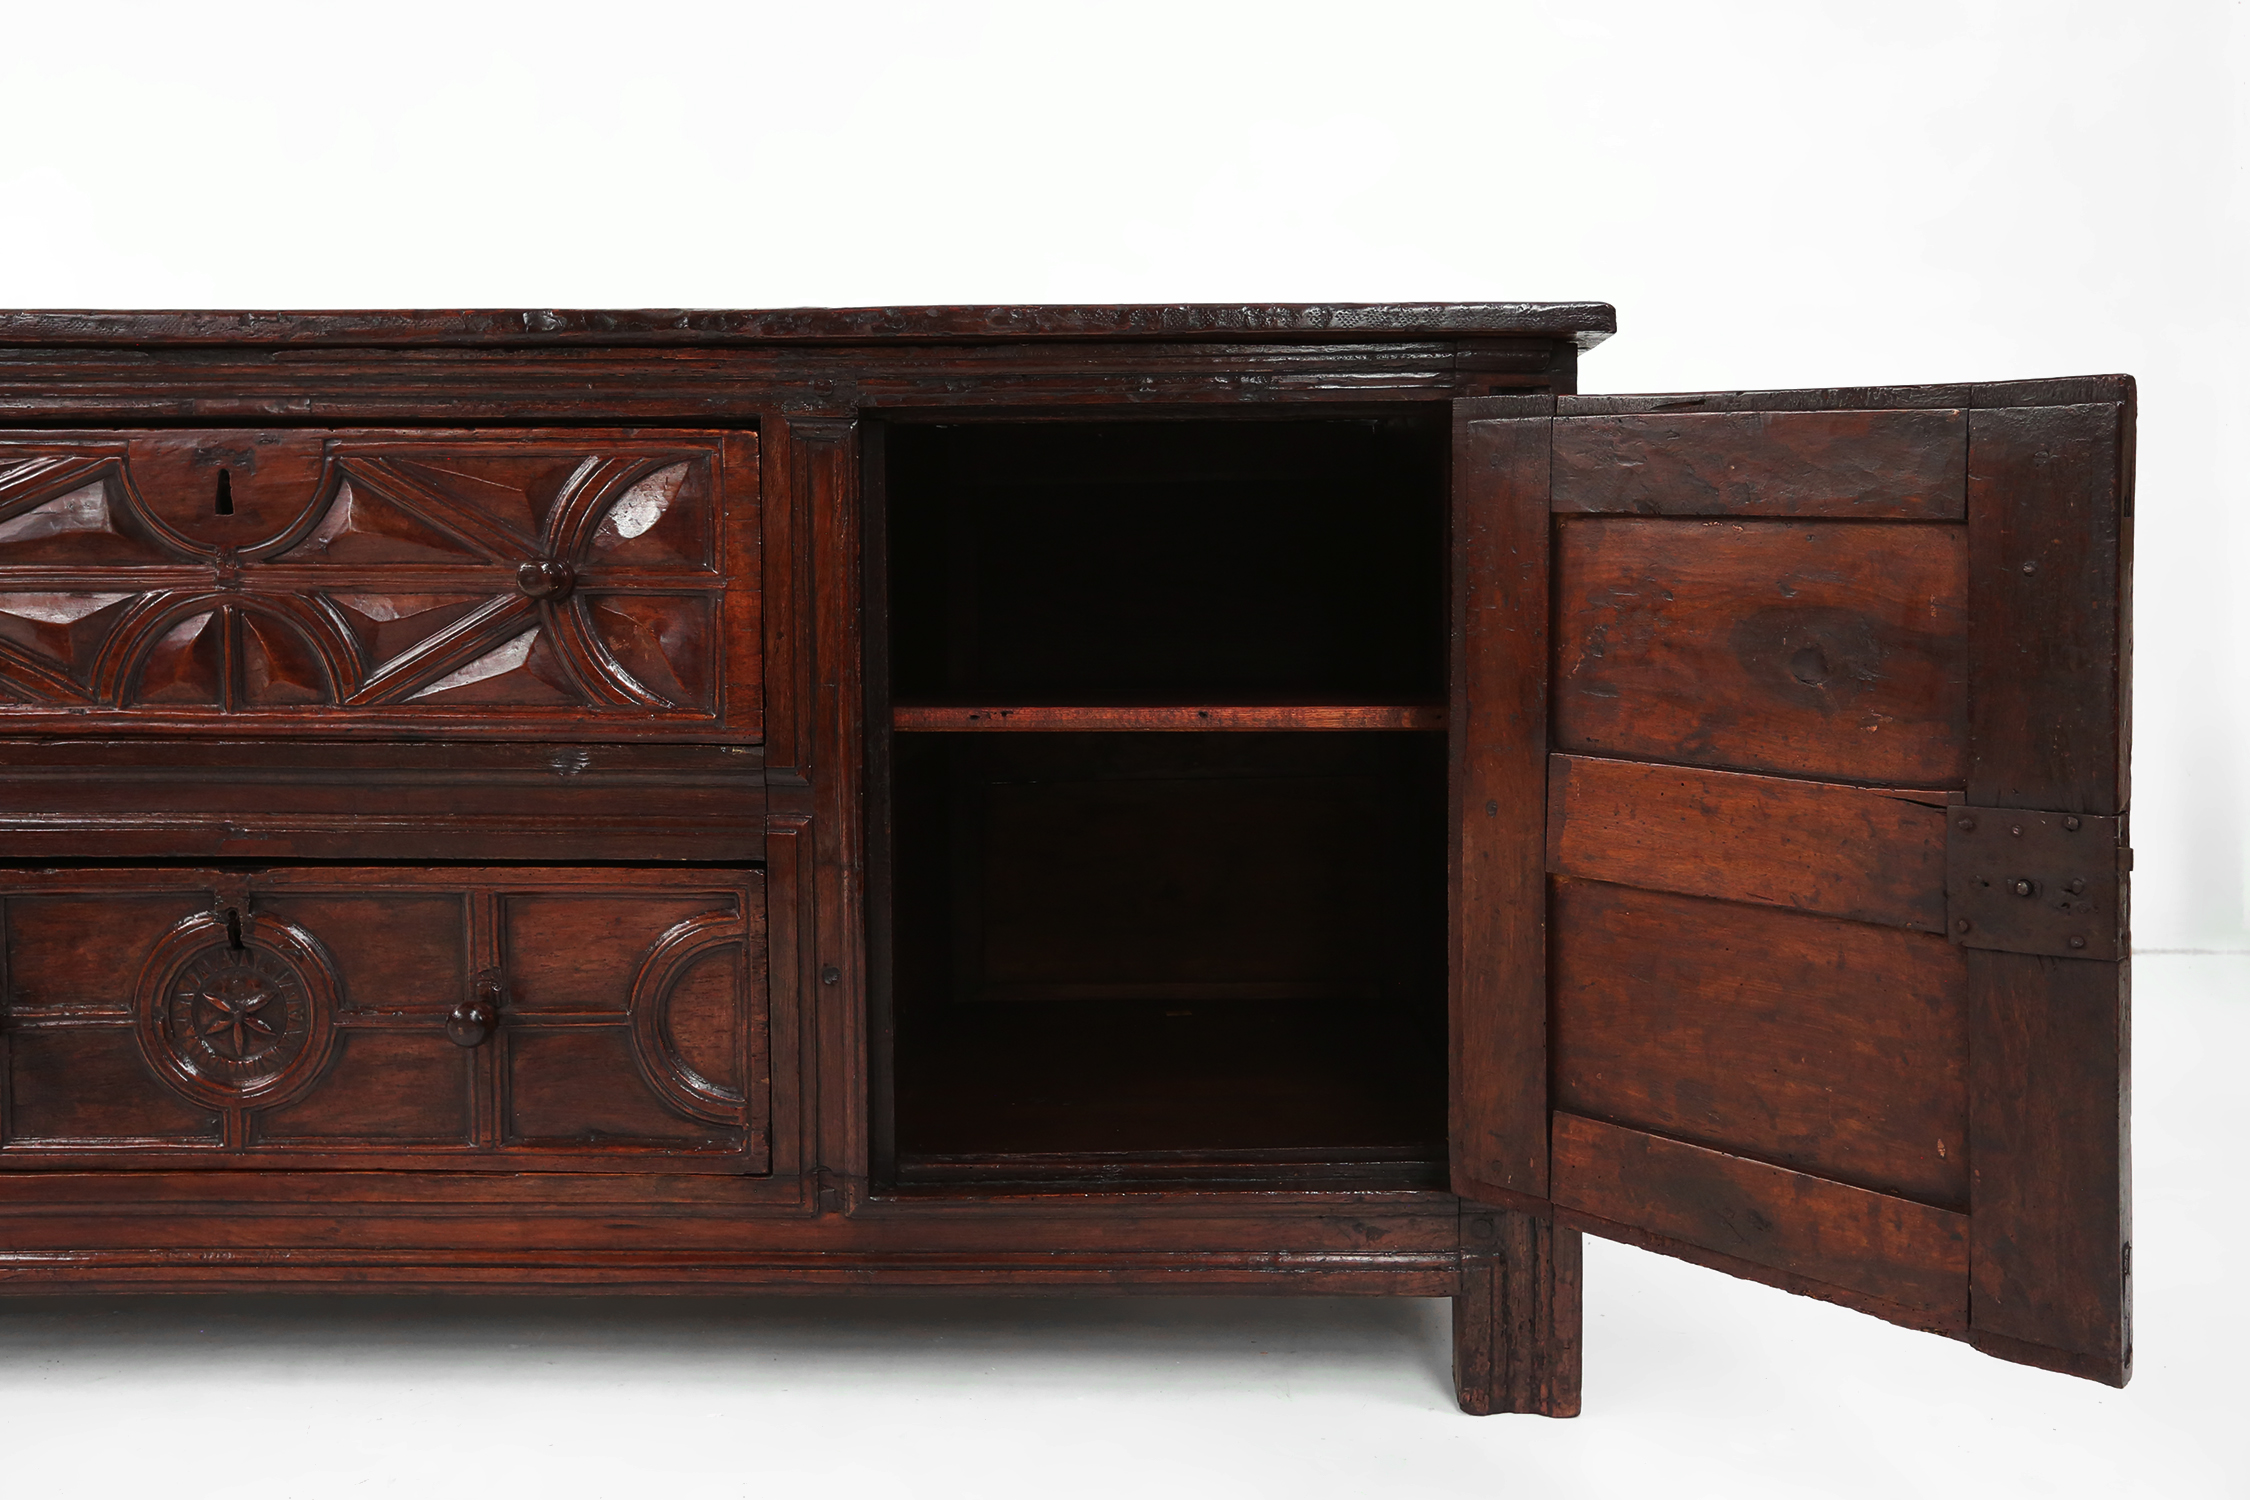 Unique 16th century French geometric sideboard in oakthumbnail